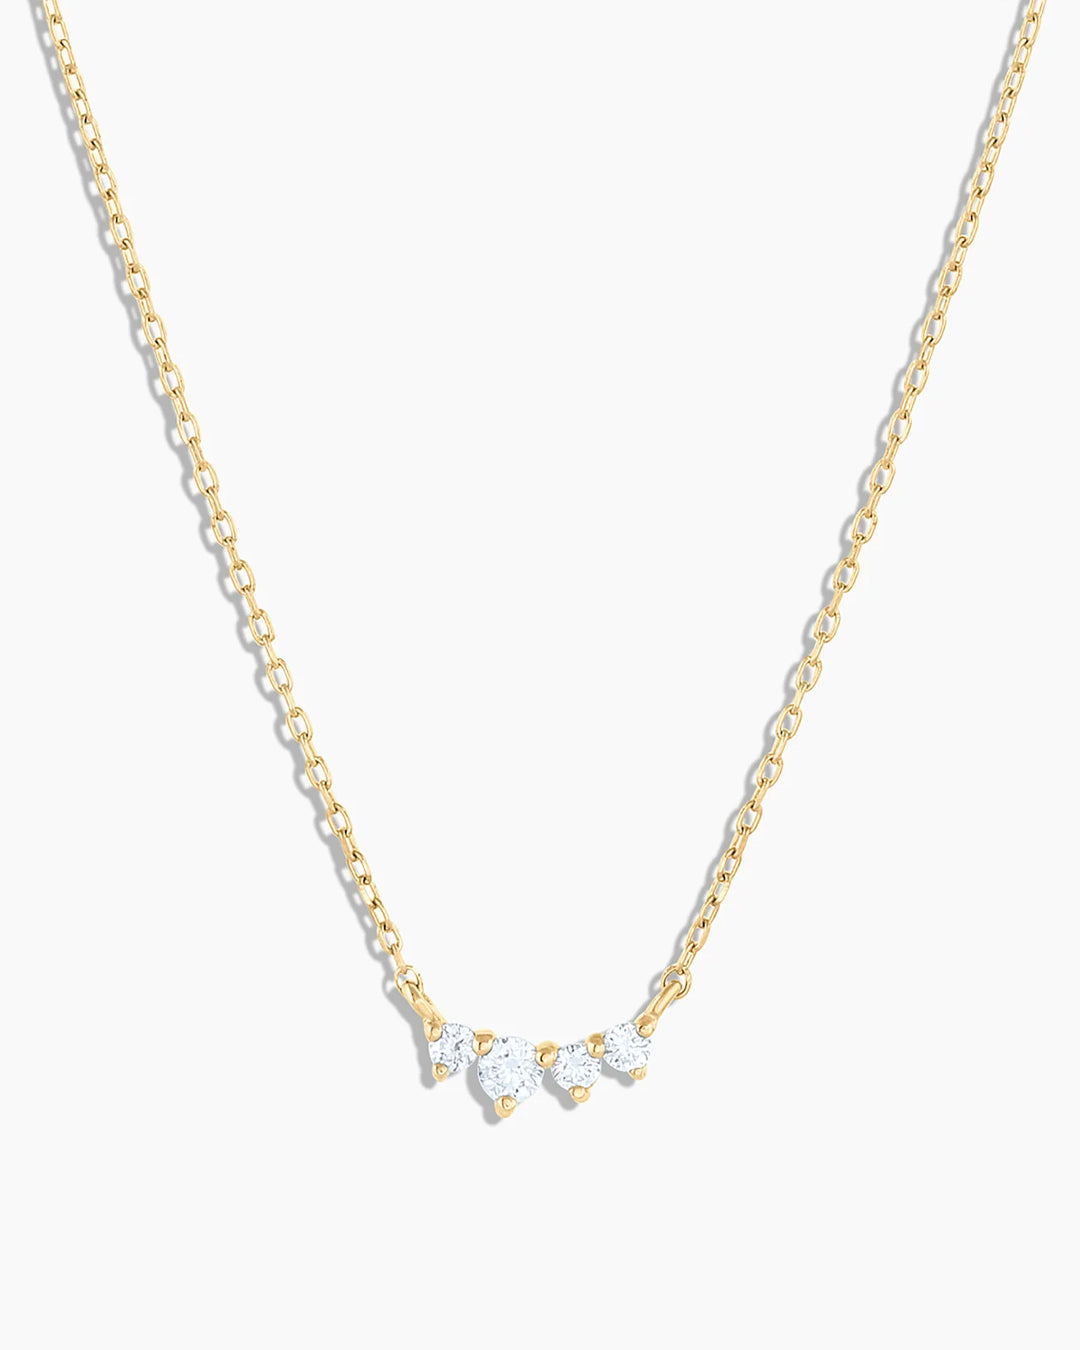 14k Solid Gold Three Stone Dainty Diamond Necklace Clavicle Pendant Necklace  For Women Fine Jewelry For Weddings From Thundermout, $139.34 | DHgate.Com